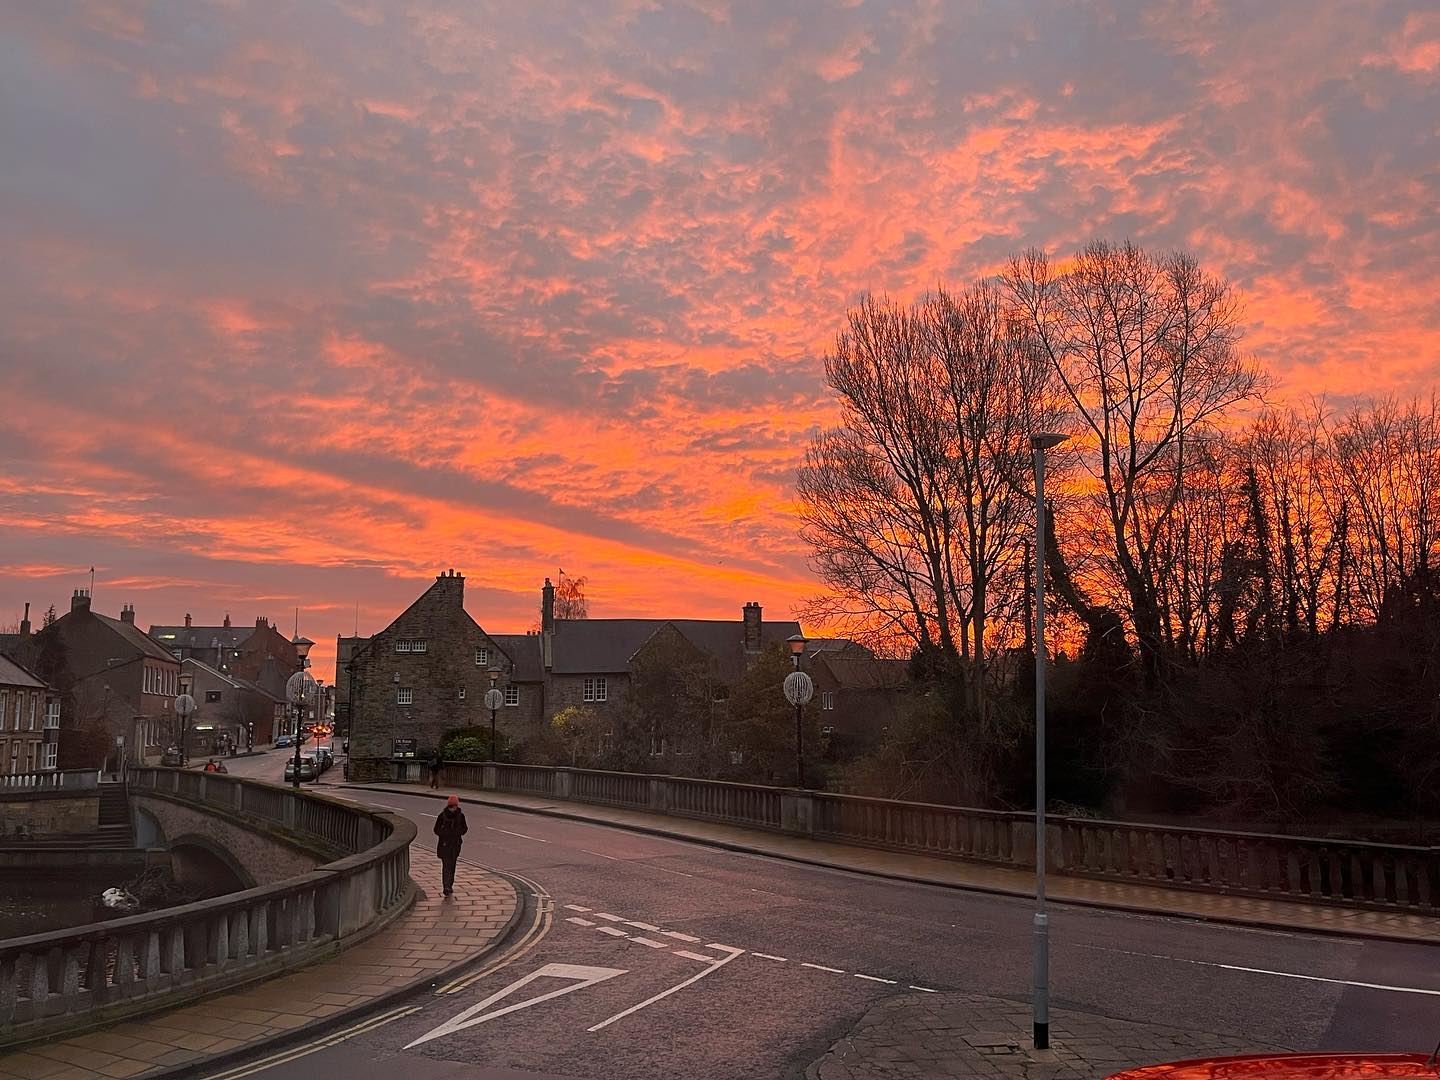 Happy Monday 😀 beautiful sky in Morpeth this morning